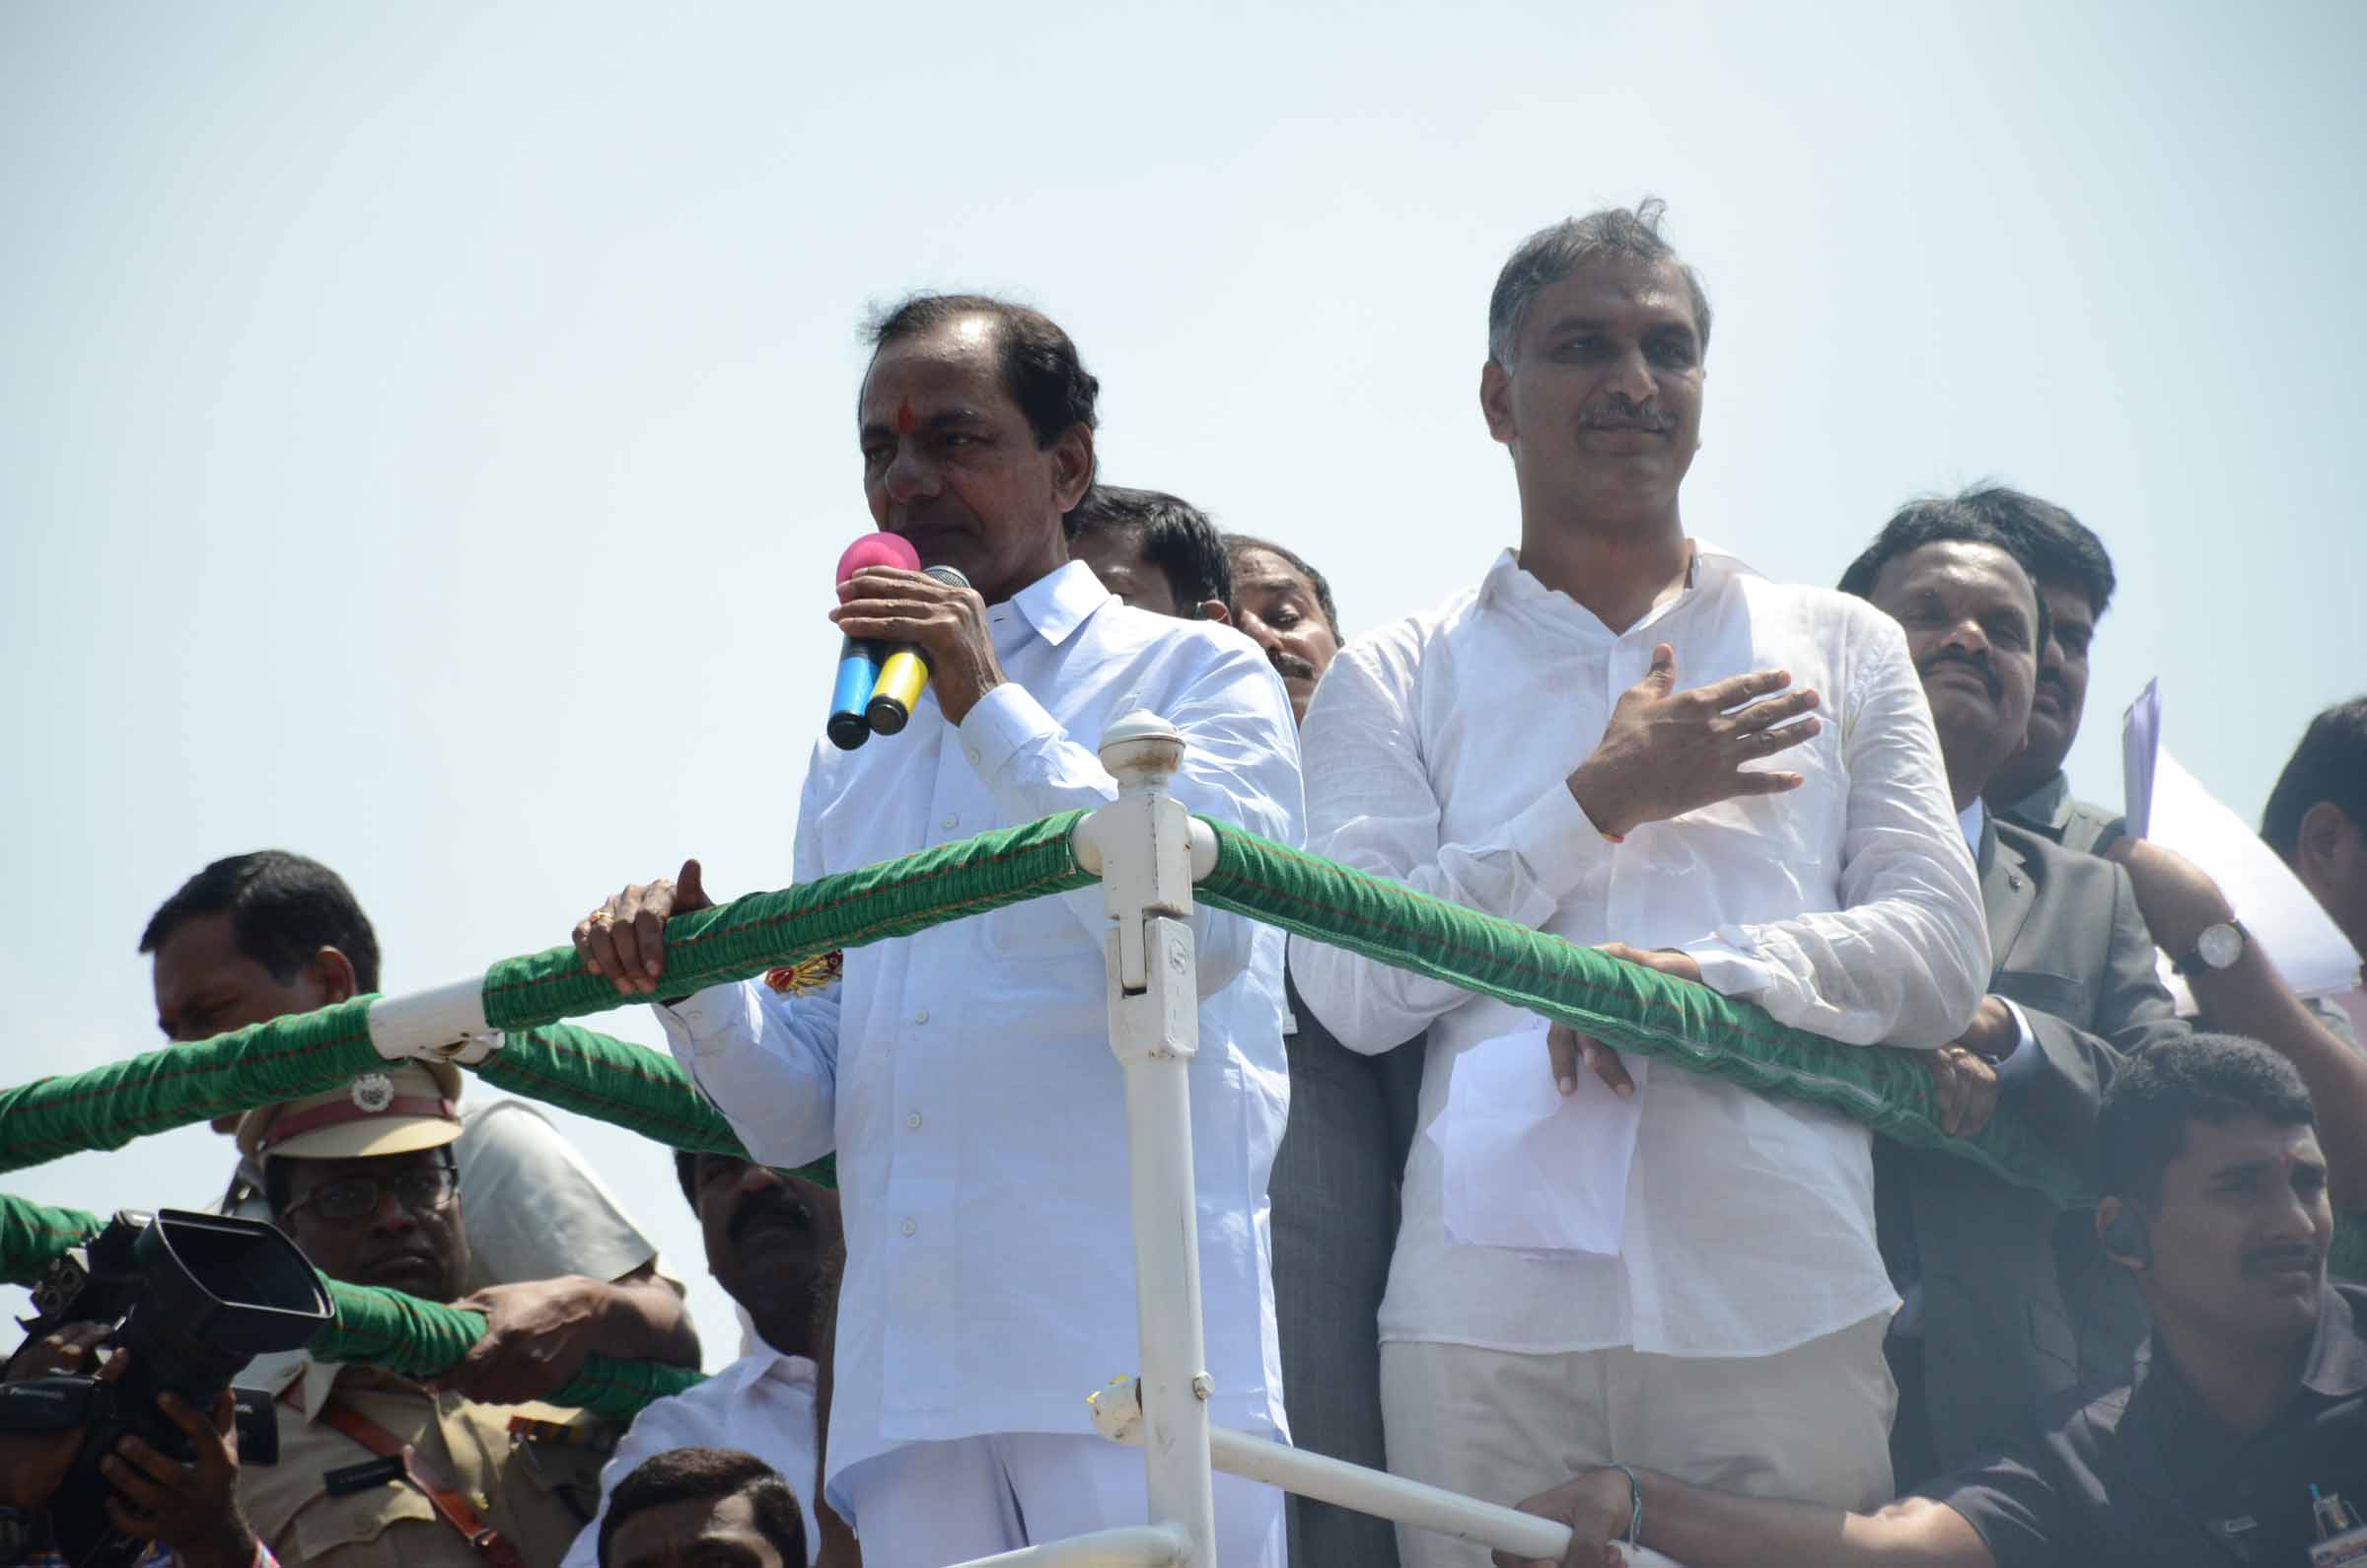 KCR was overwhelmed at Siddipet 